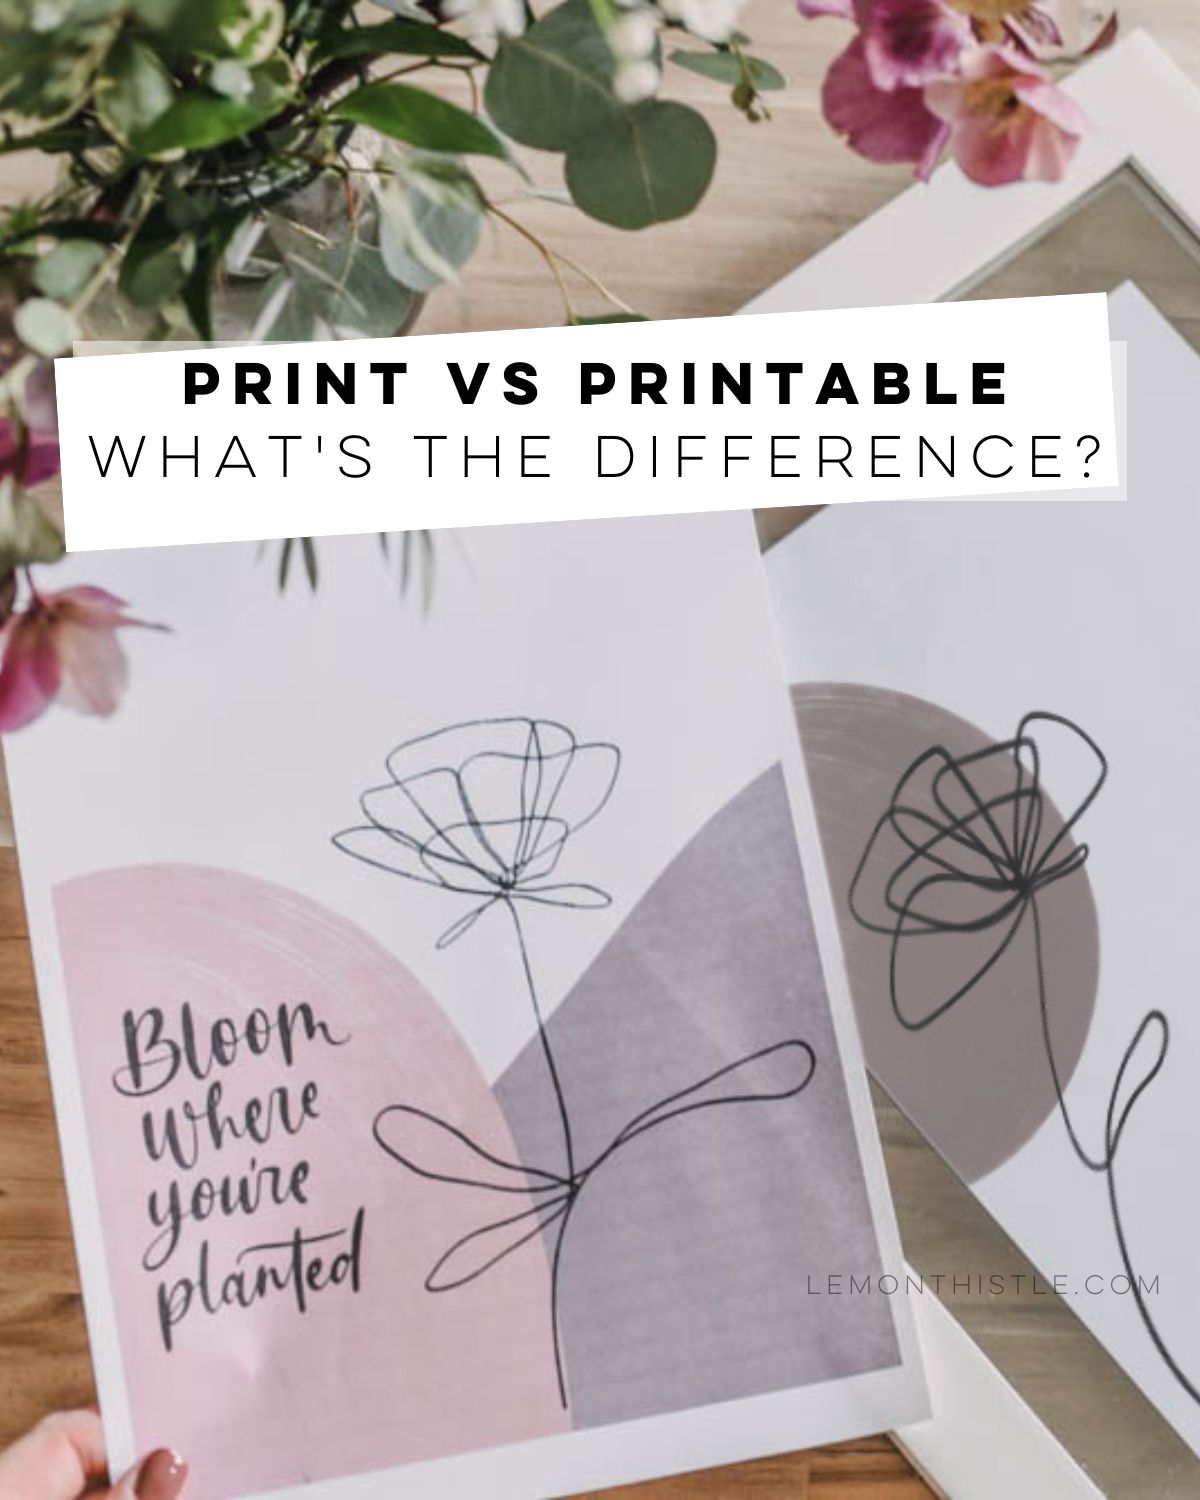 Print vs Printable: what's the difference? Text over image of printed art for spring